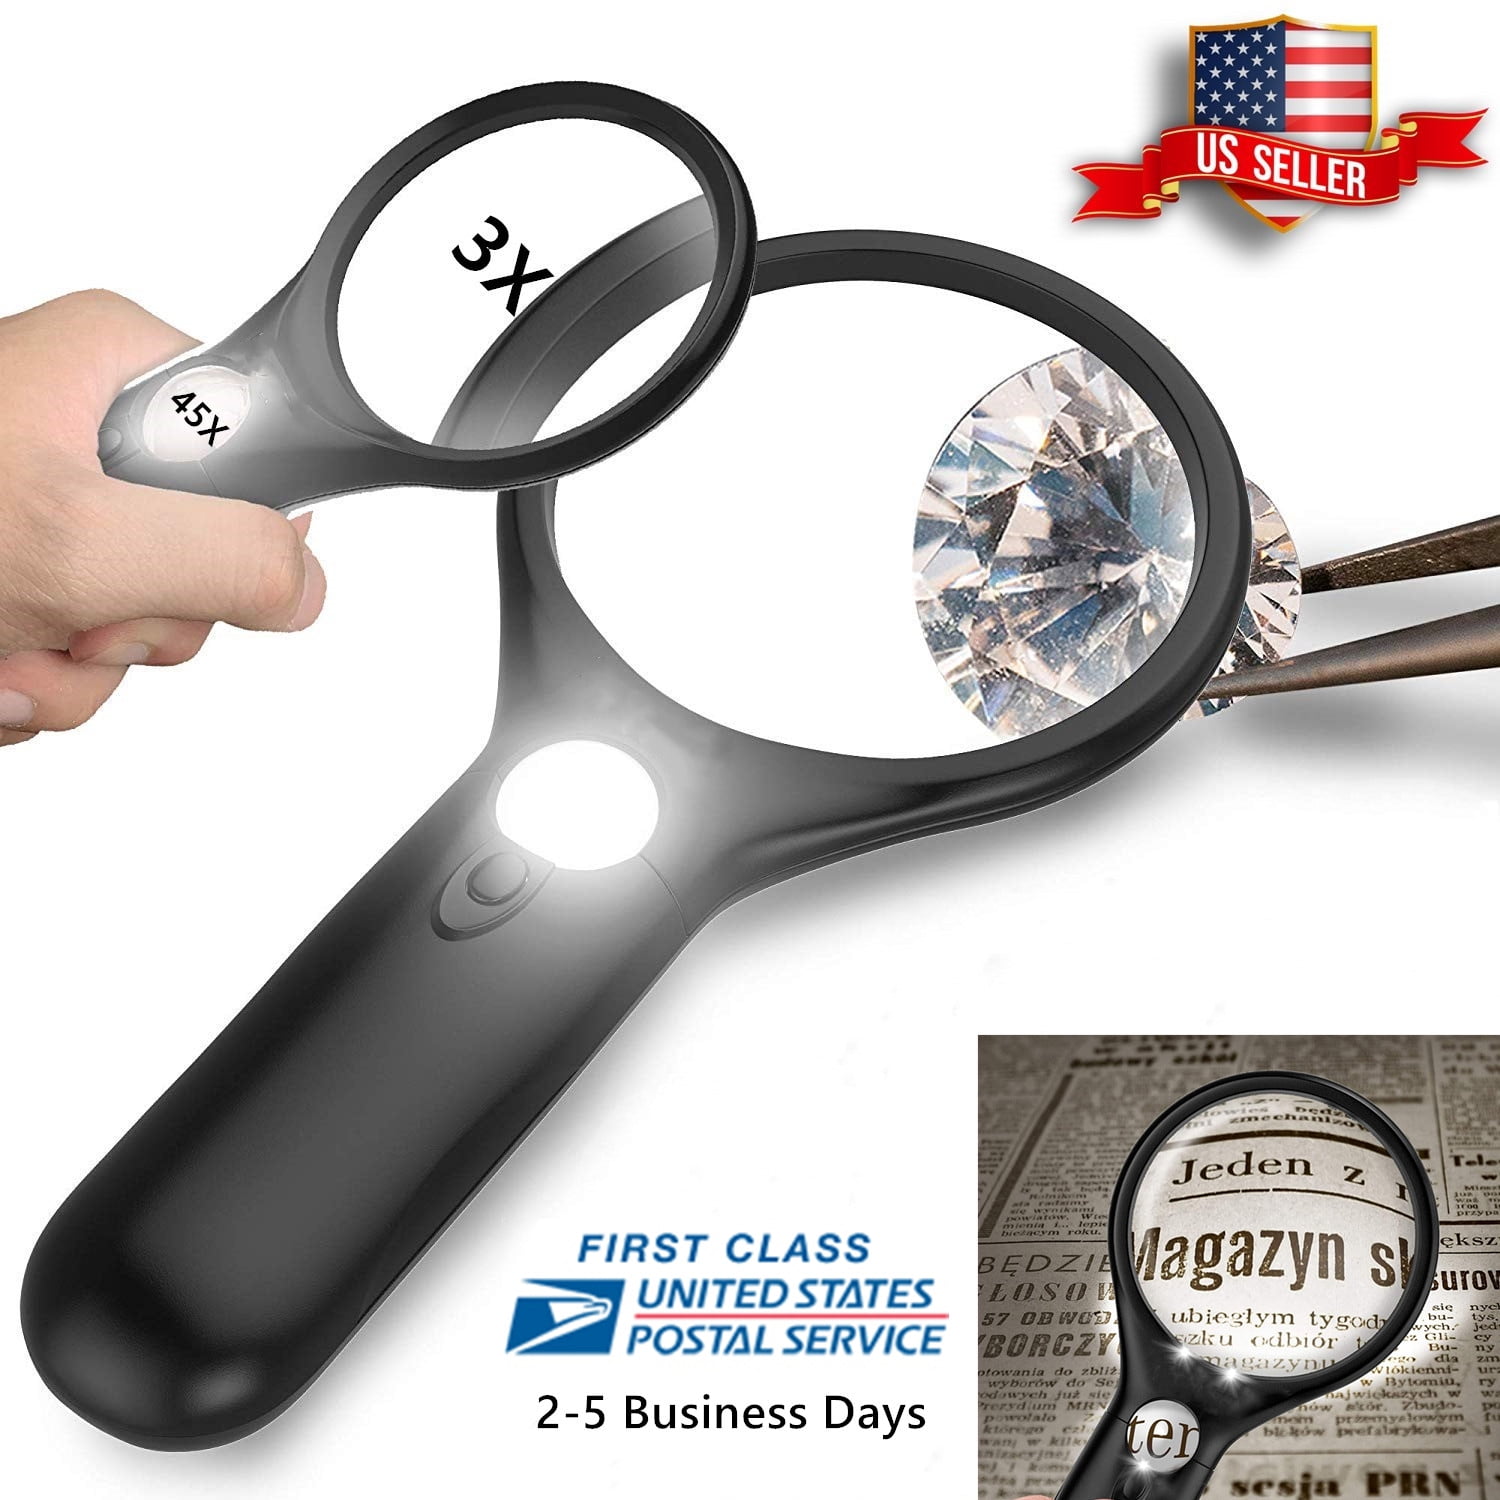 LED Magnifying Glass 2x, 3X, 45x Magnifier Lens - Handheld